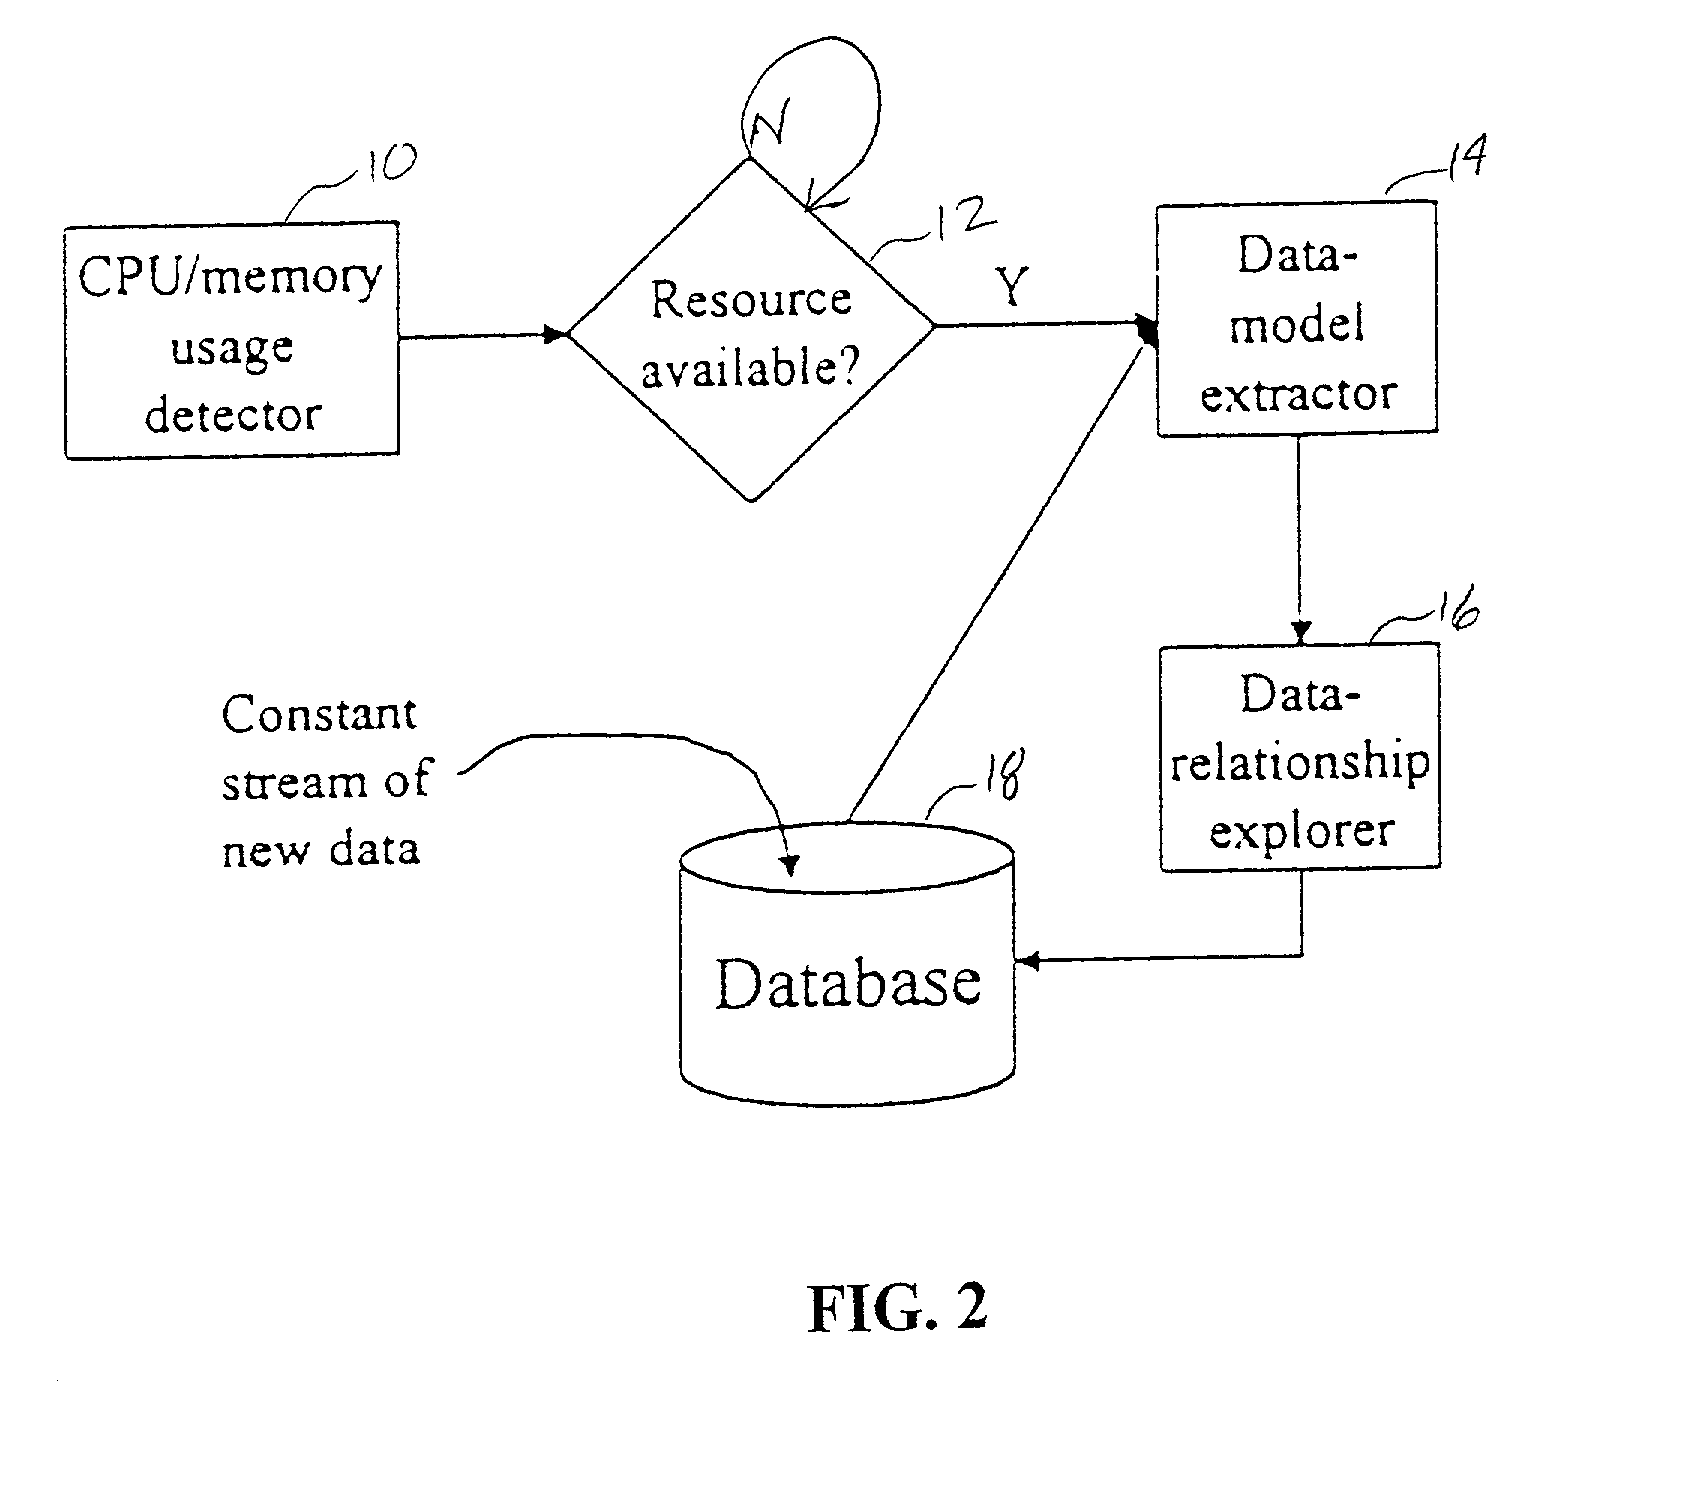 Automatic data explorer that determines relationships among original and derived fields